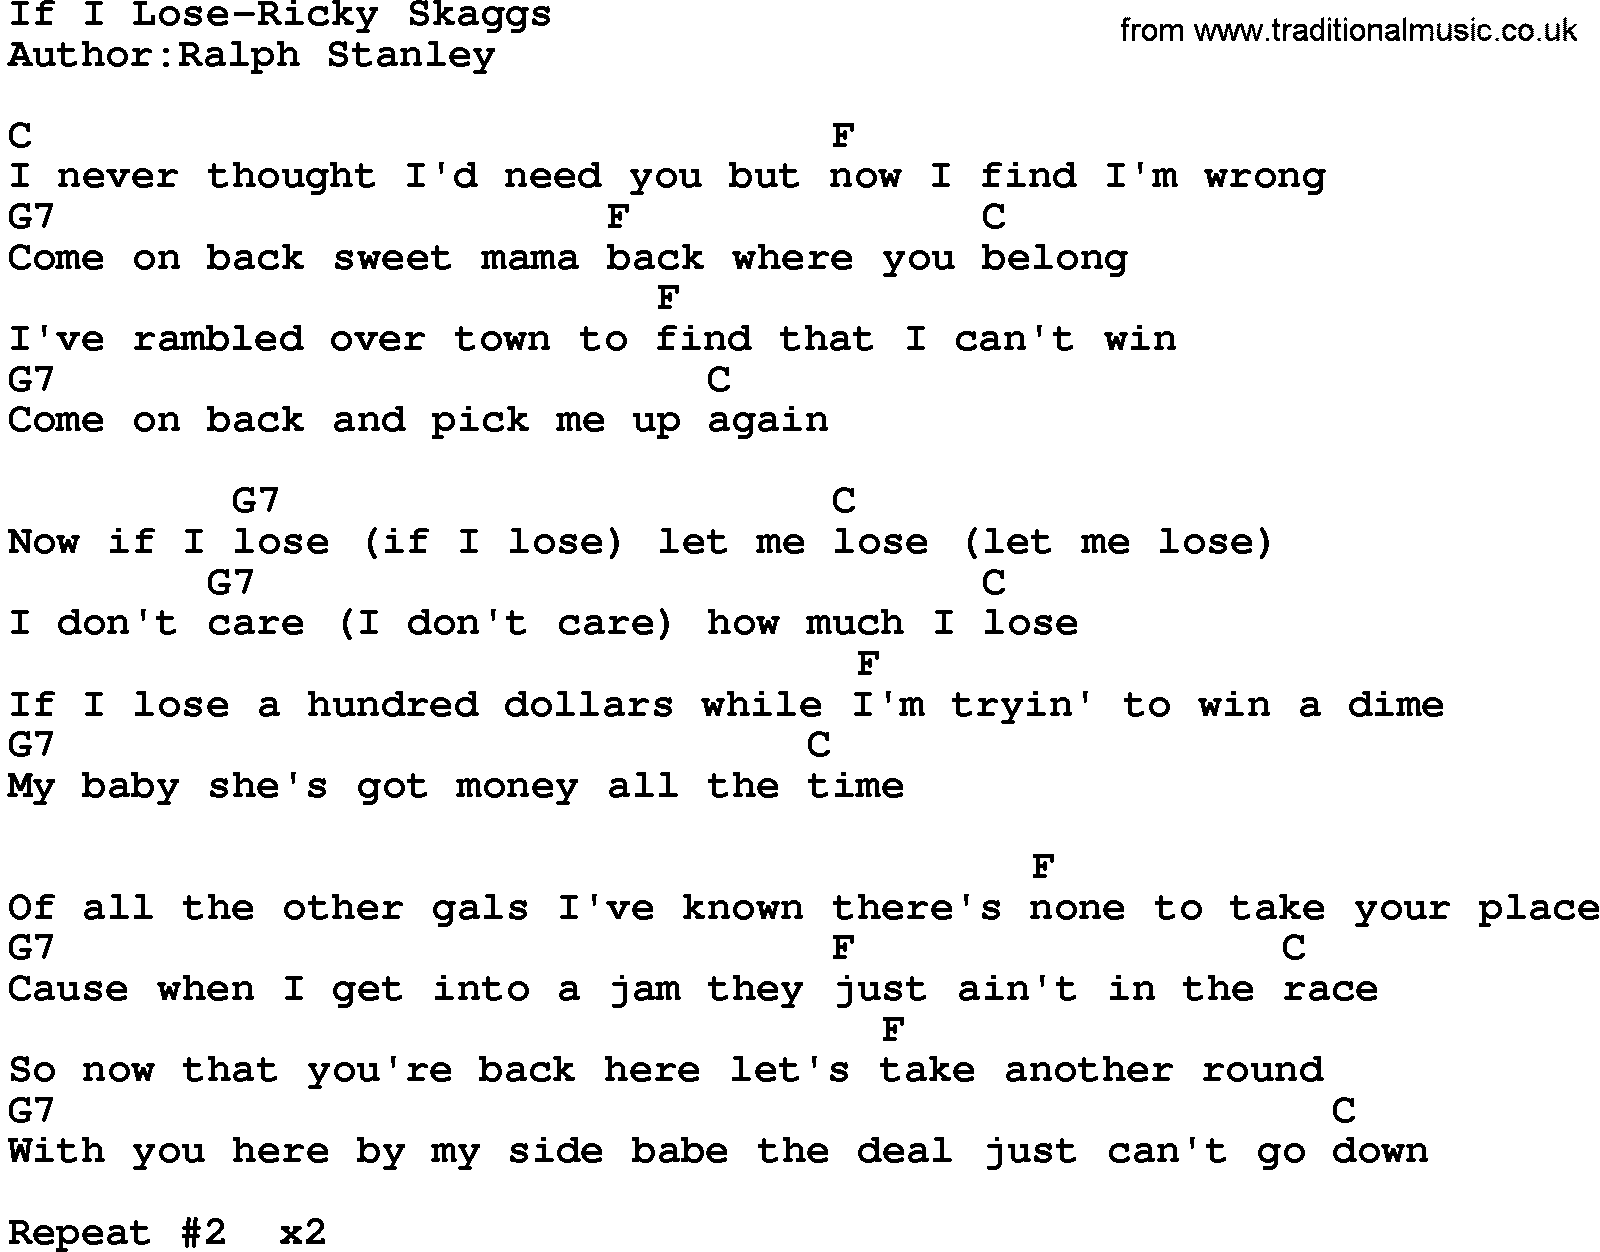 Country music song: If I Lose-Ricky Skaggs lyrics and chords